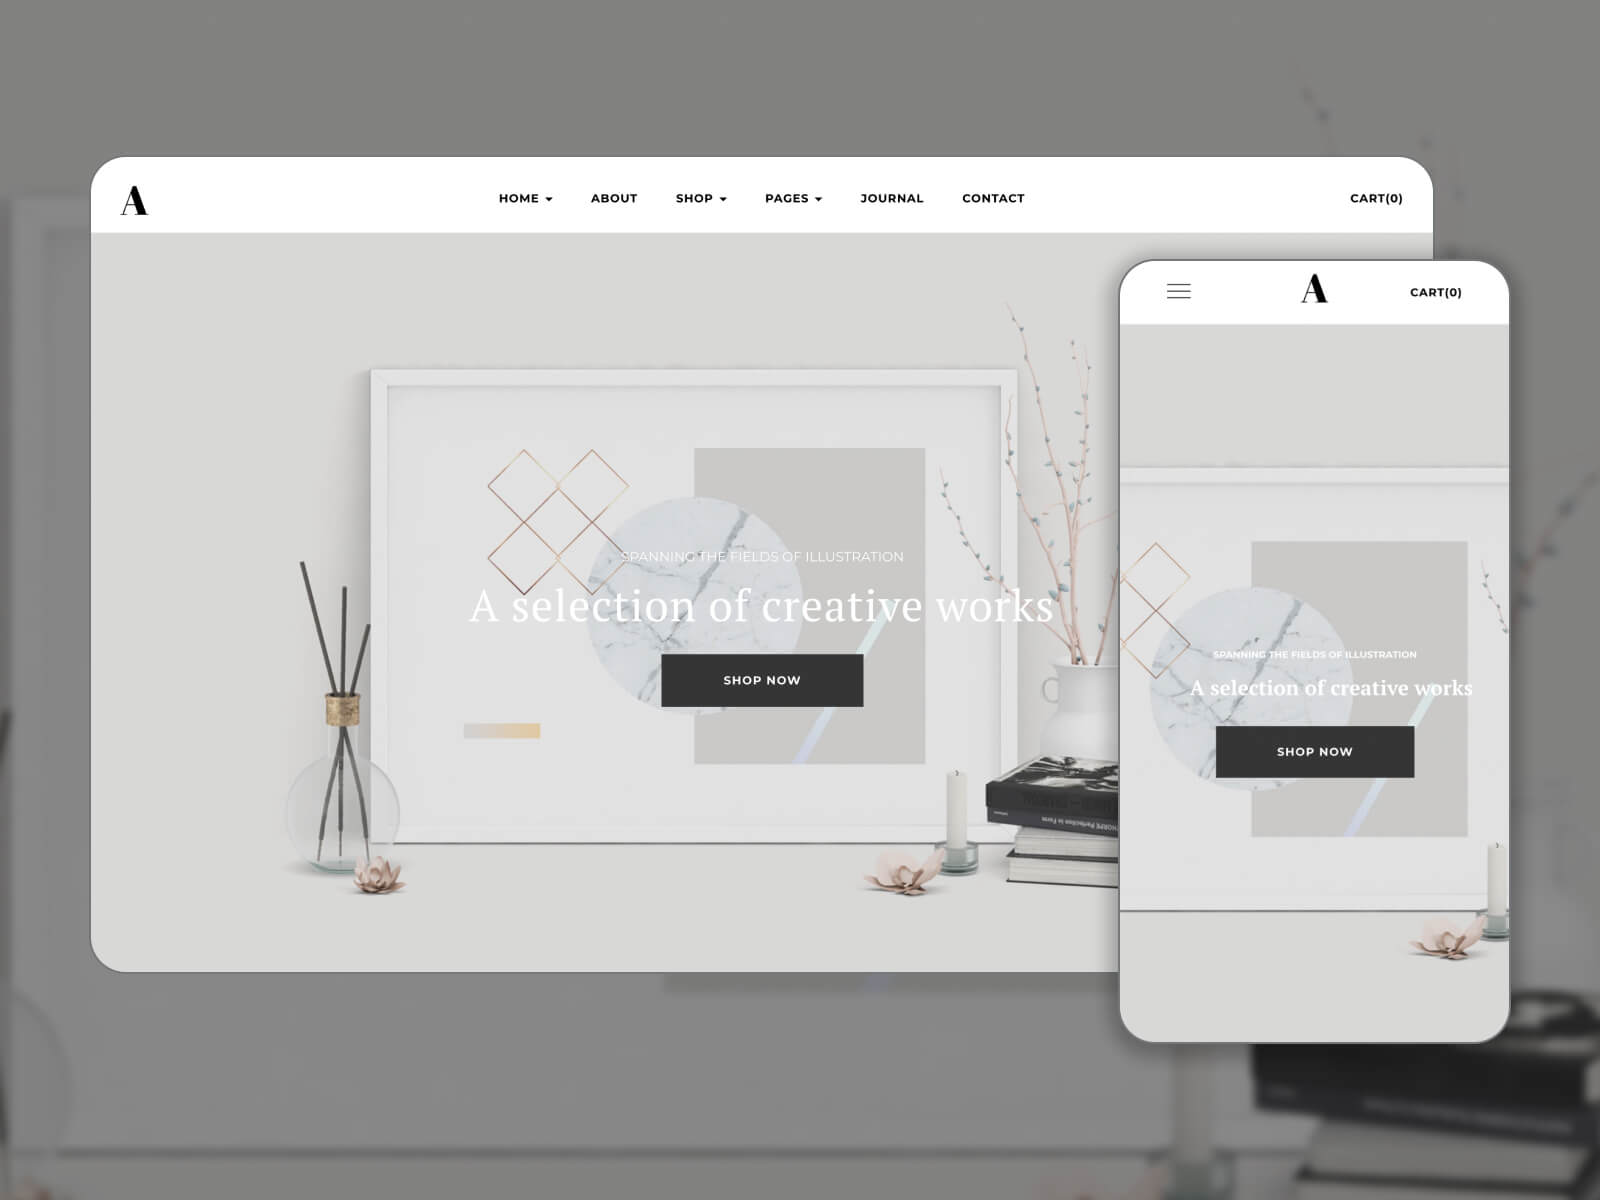 Screenshot of Artday - organized WordPress theme for art platforms with eCommerce tools in darkslategray, silver, gainsboro, white, and gray color scheme.